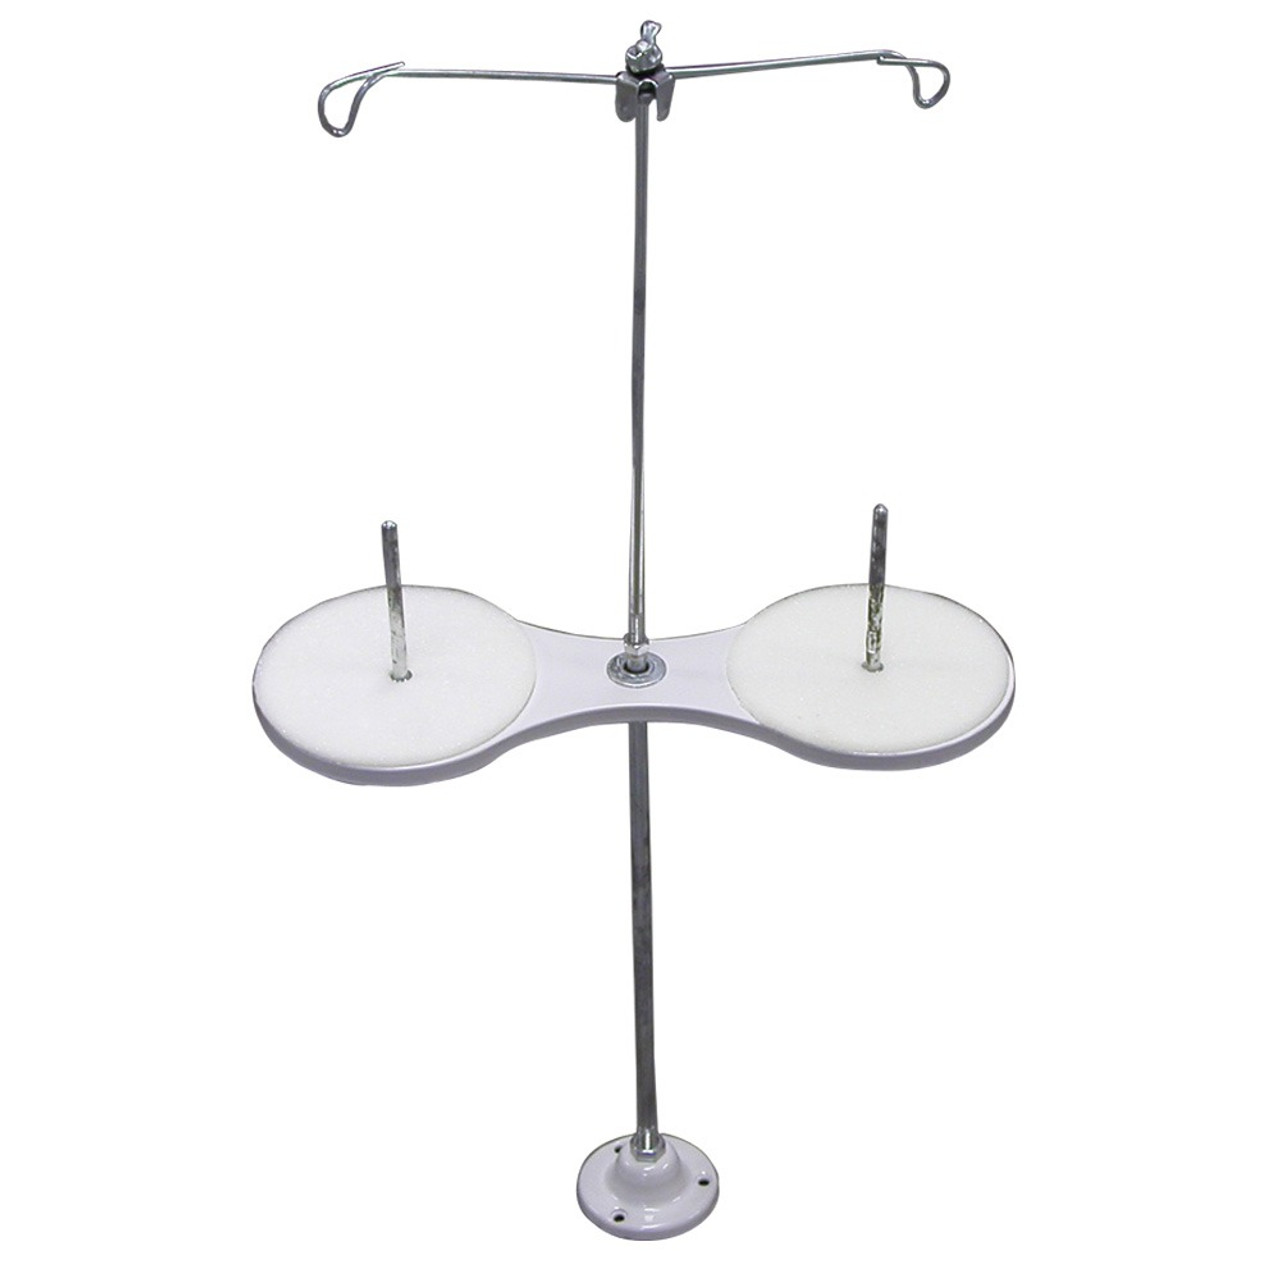 Thread Stand for sewing machine tables